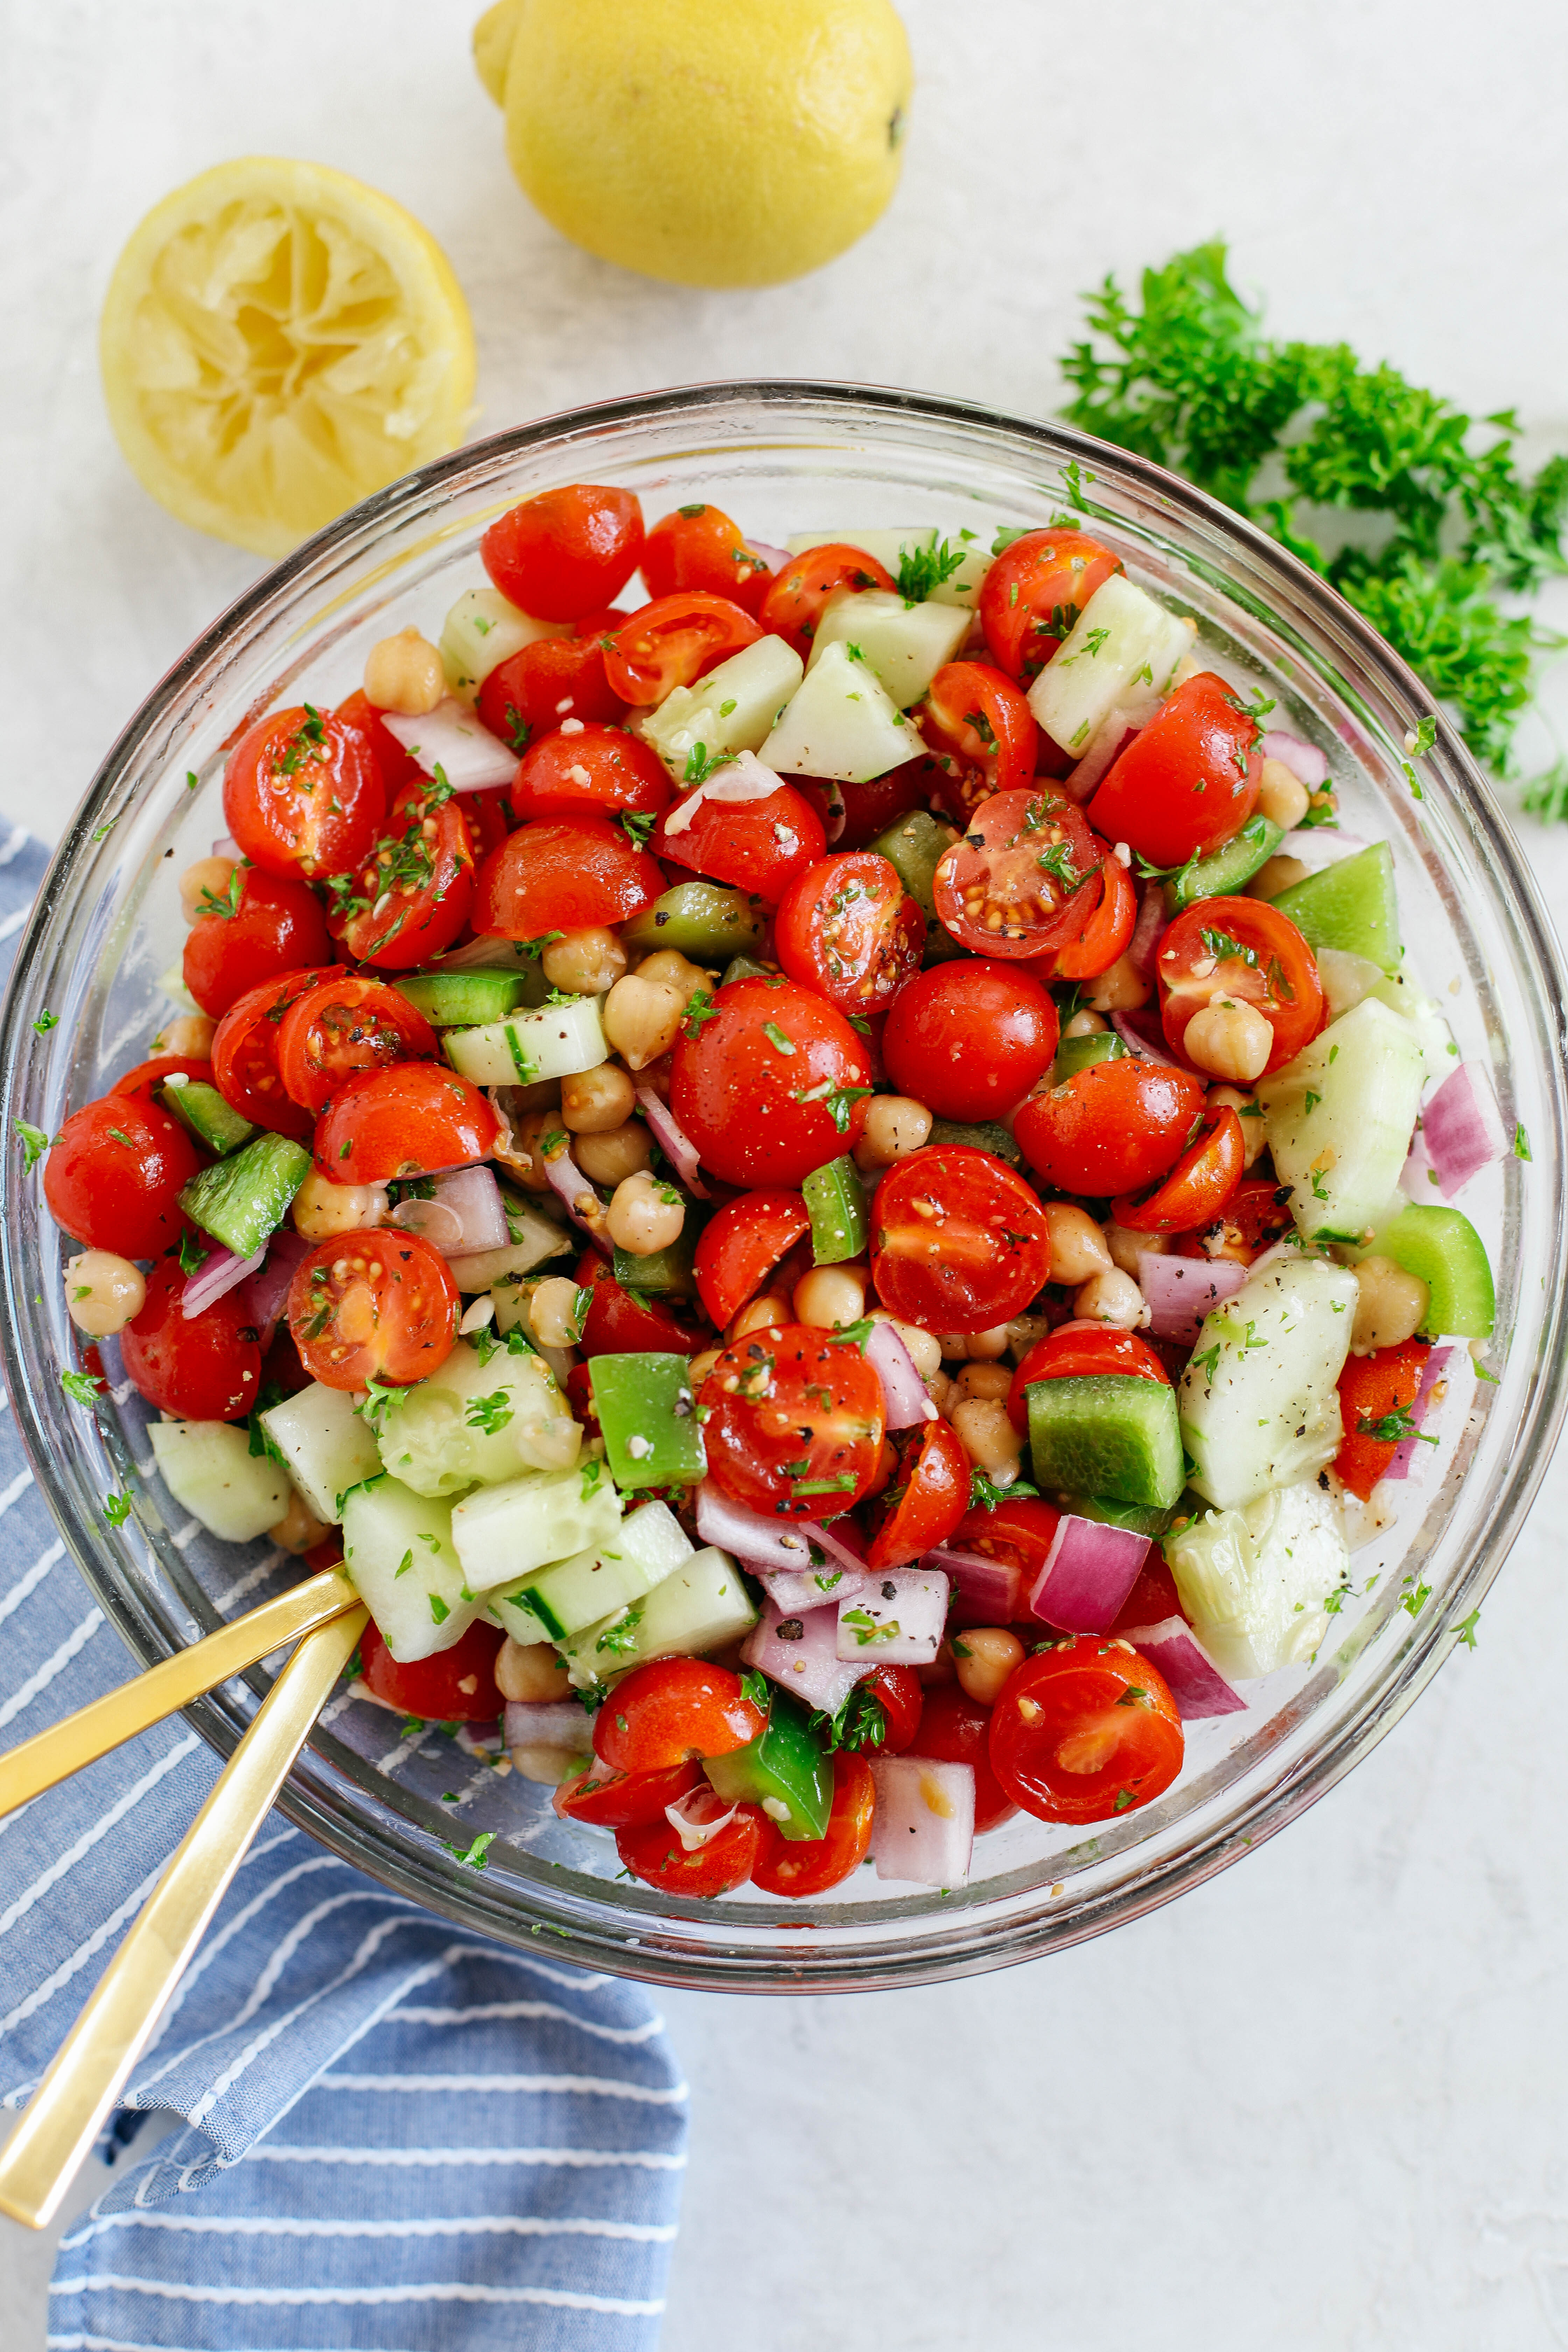 This Tomato, Cucumber and Chickpea Salad is a delicious summer staple that is quick, healthy and the perfect side dish with grilled chicken, fish or steak!